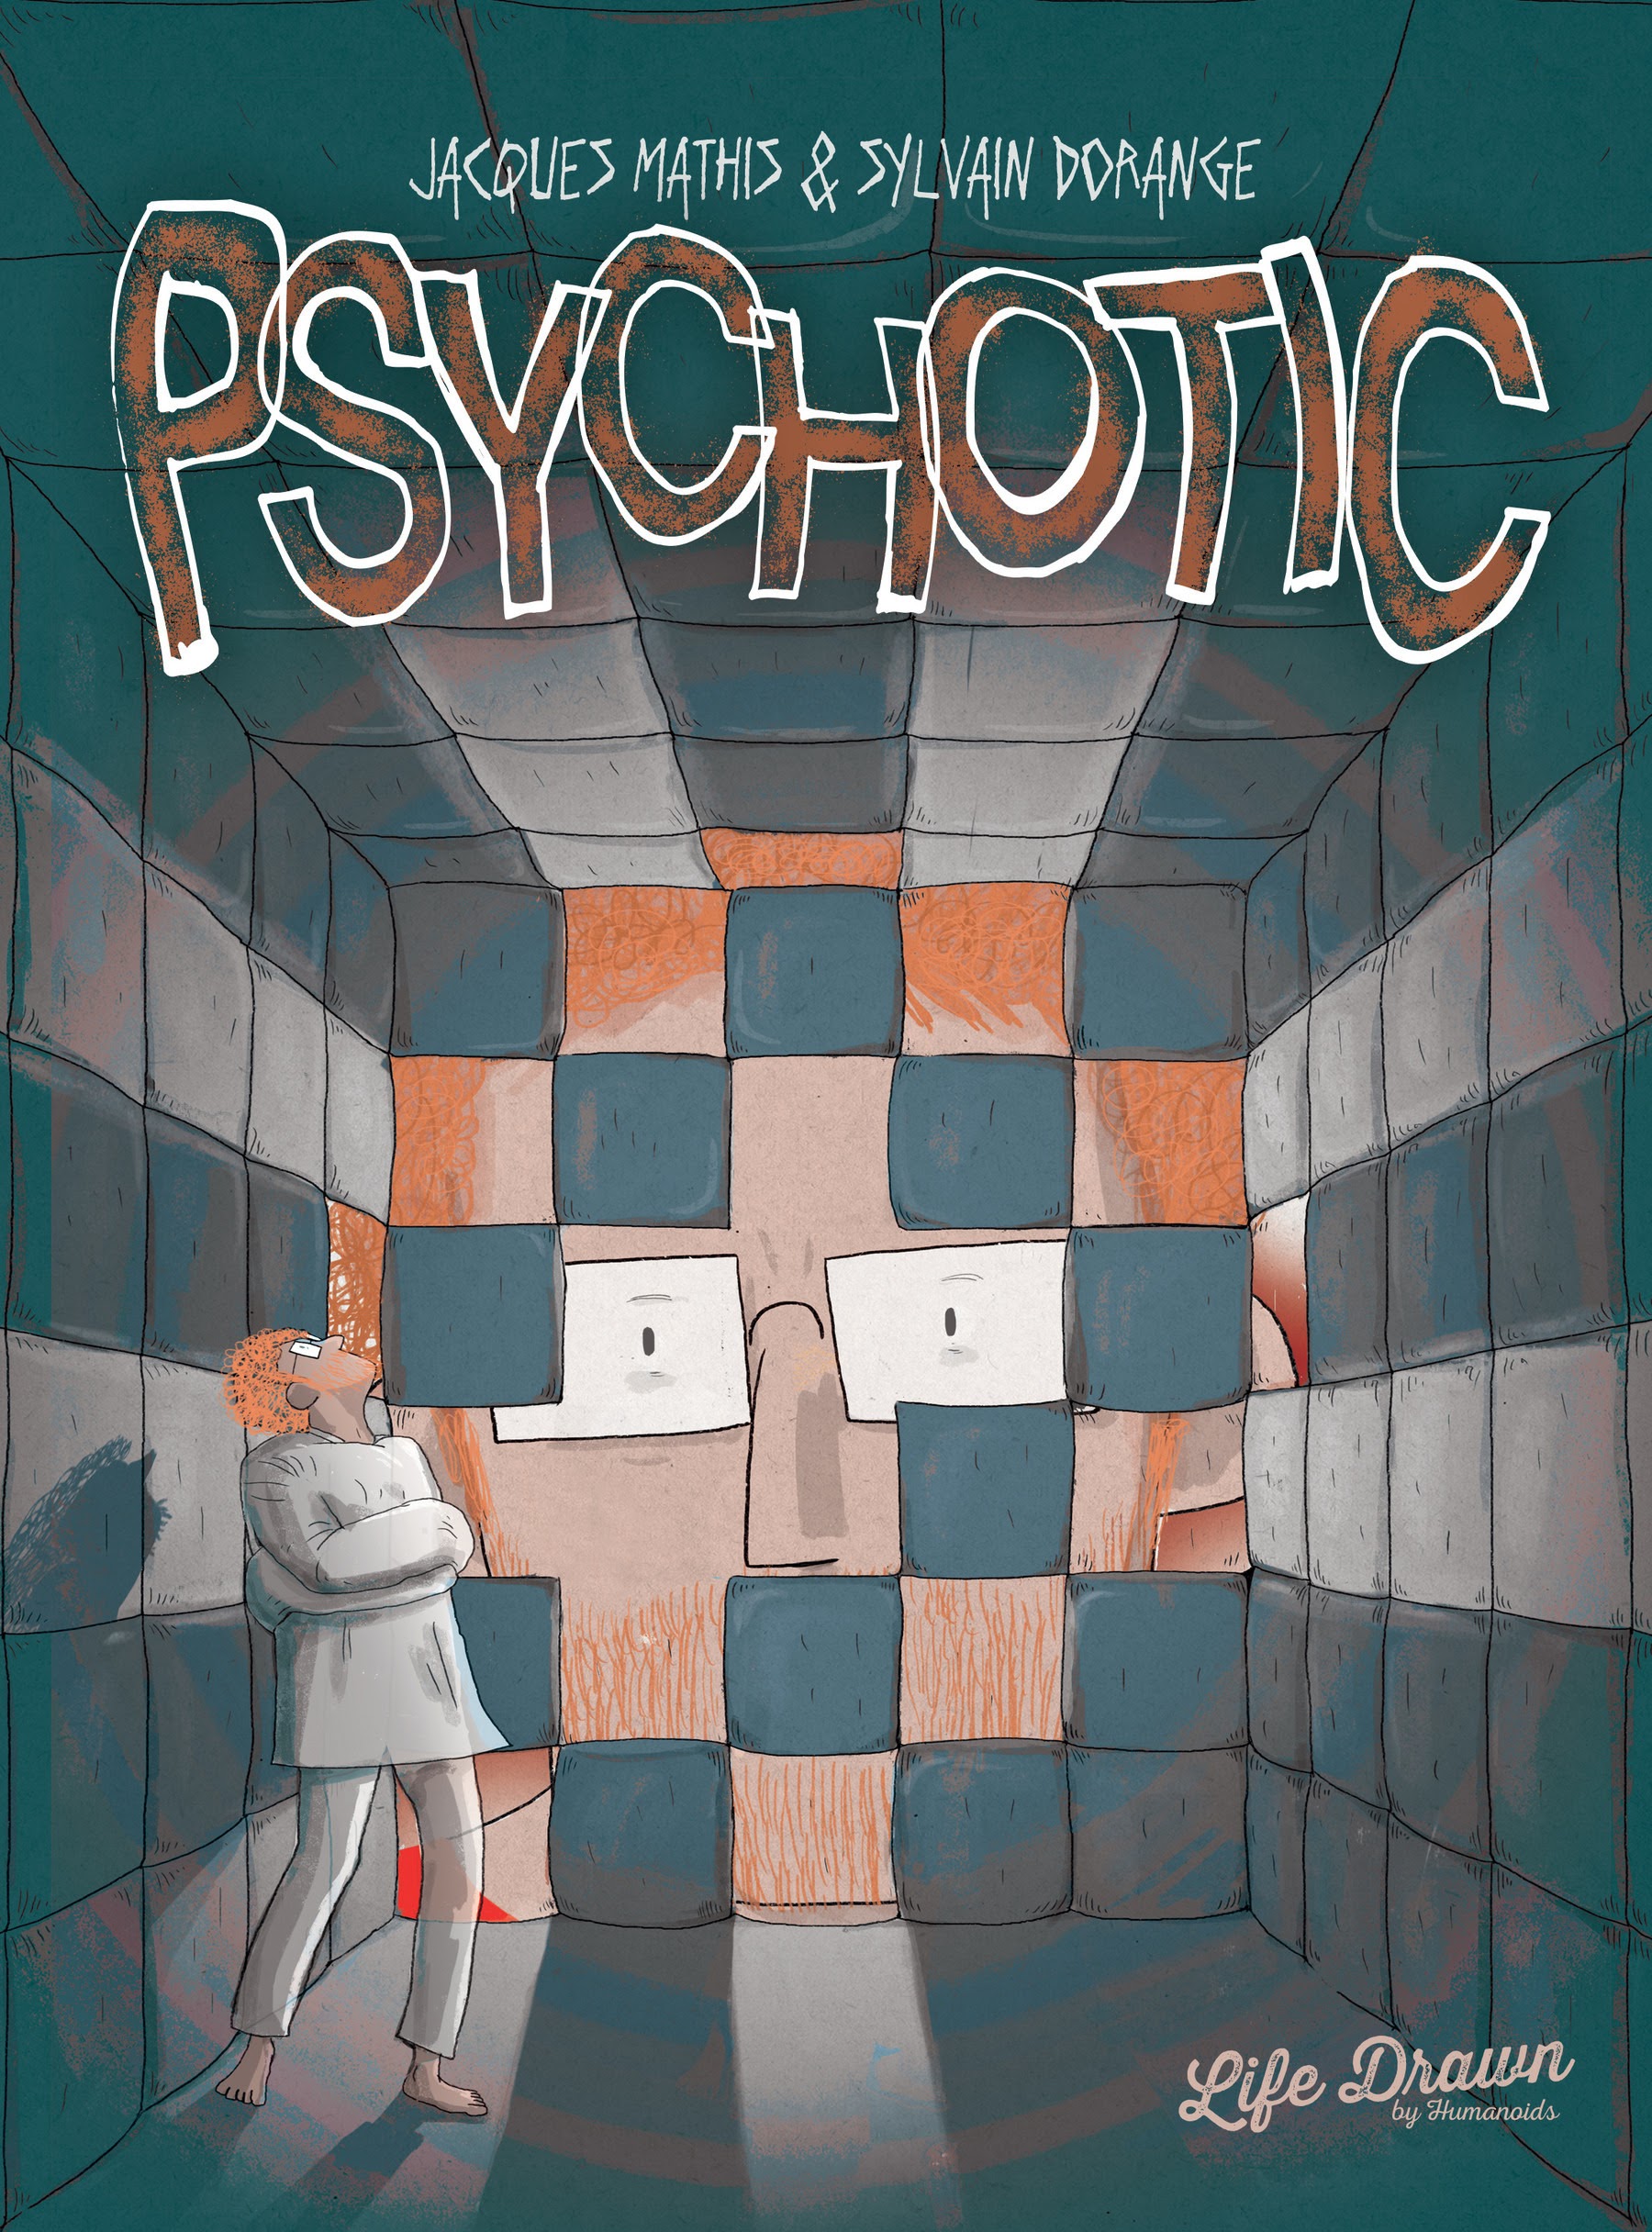 Read online Psychotic comic -  Issue # TPB (Part 1) - 1